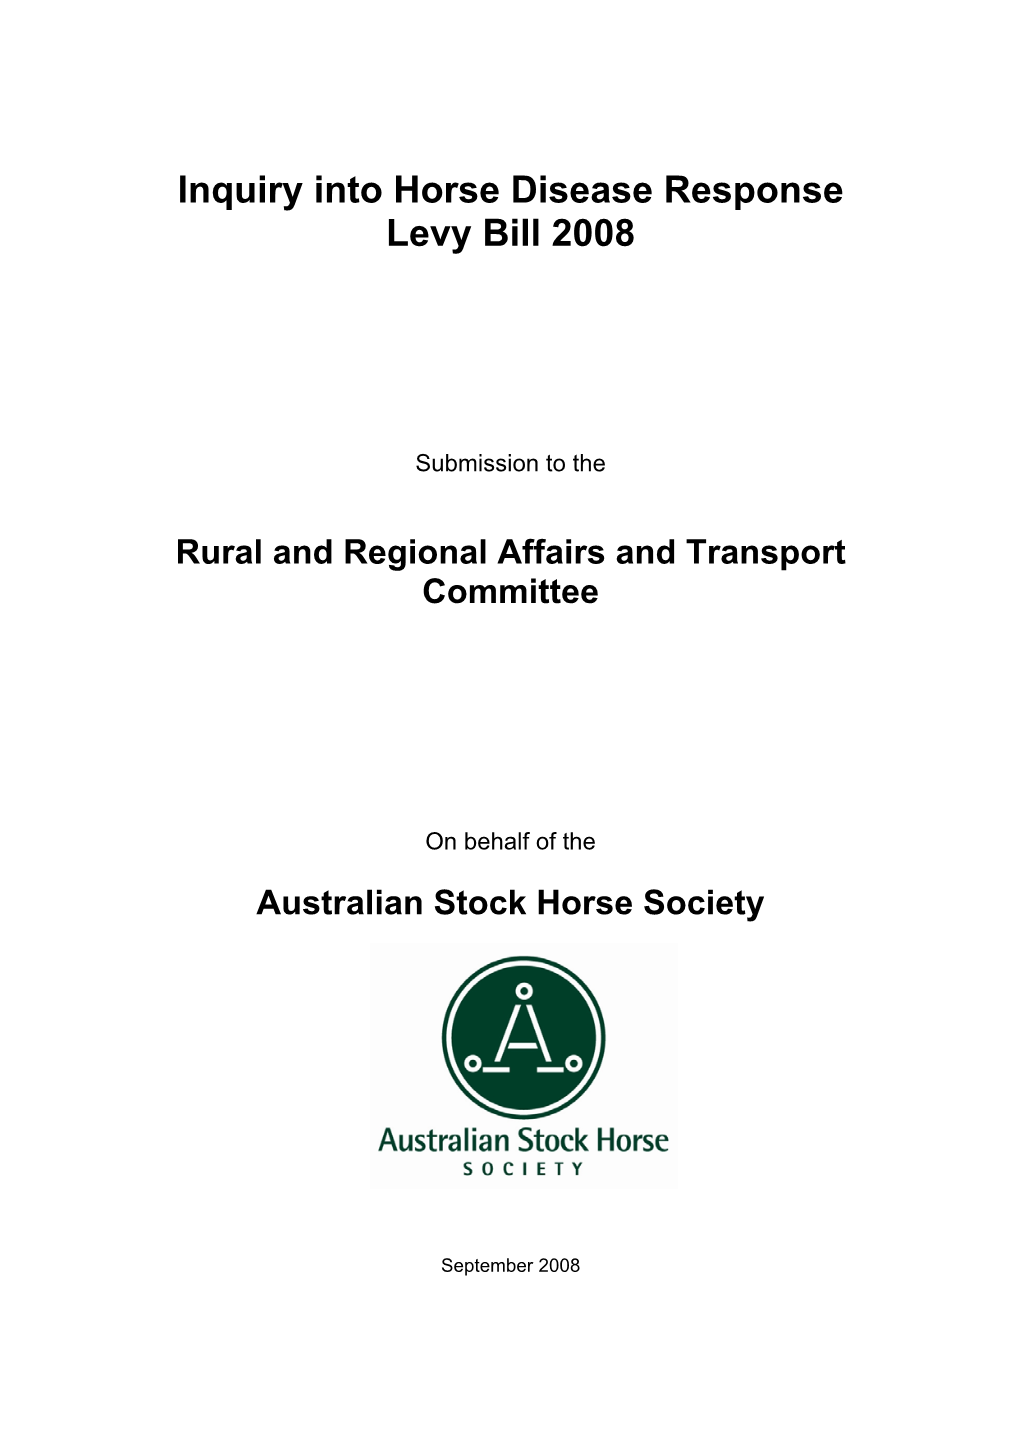 Horse Disease Response Levy Collection Bill 2008, A